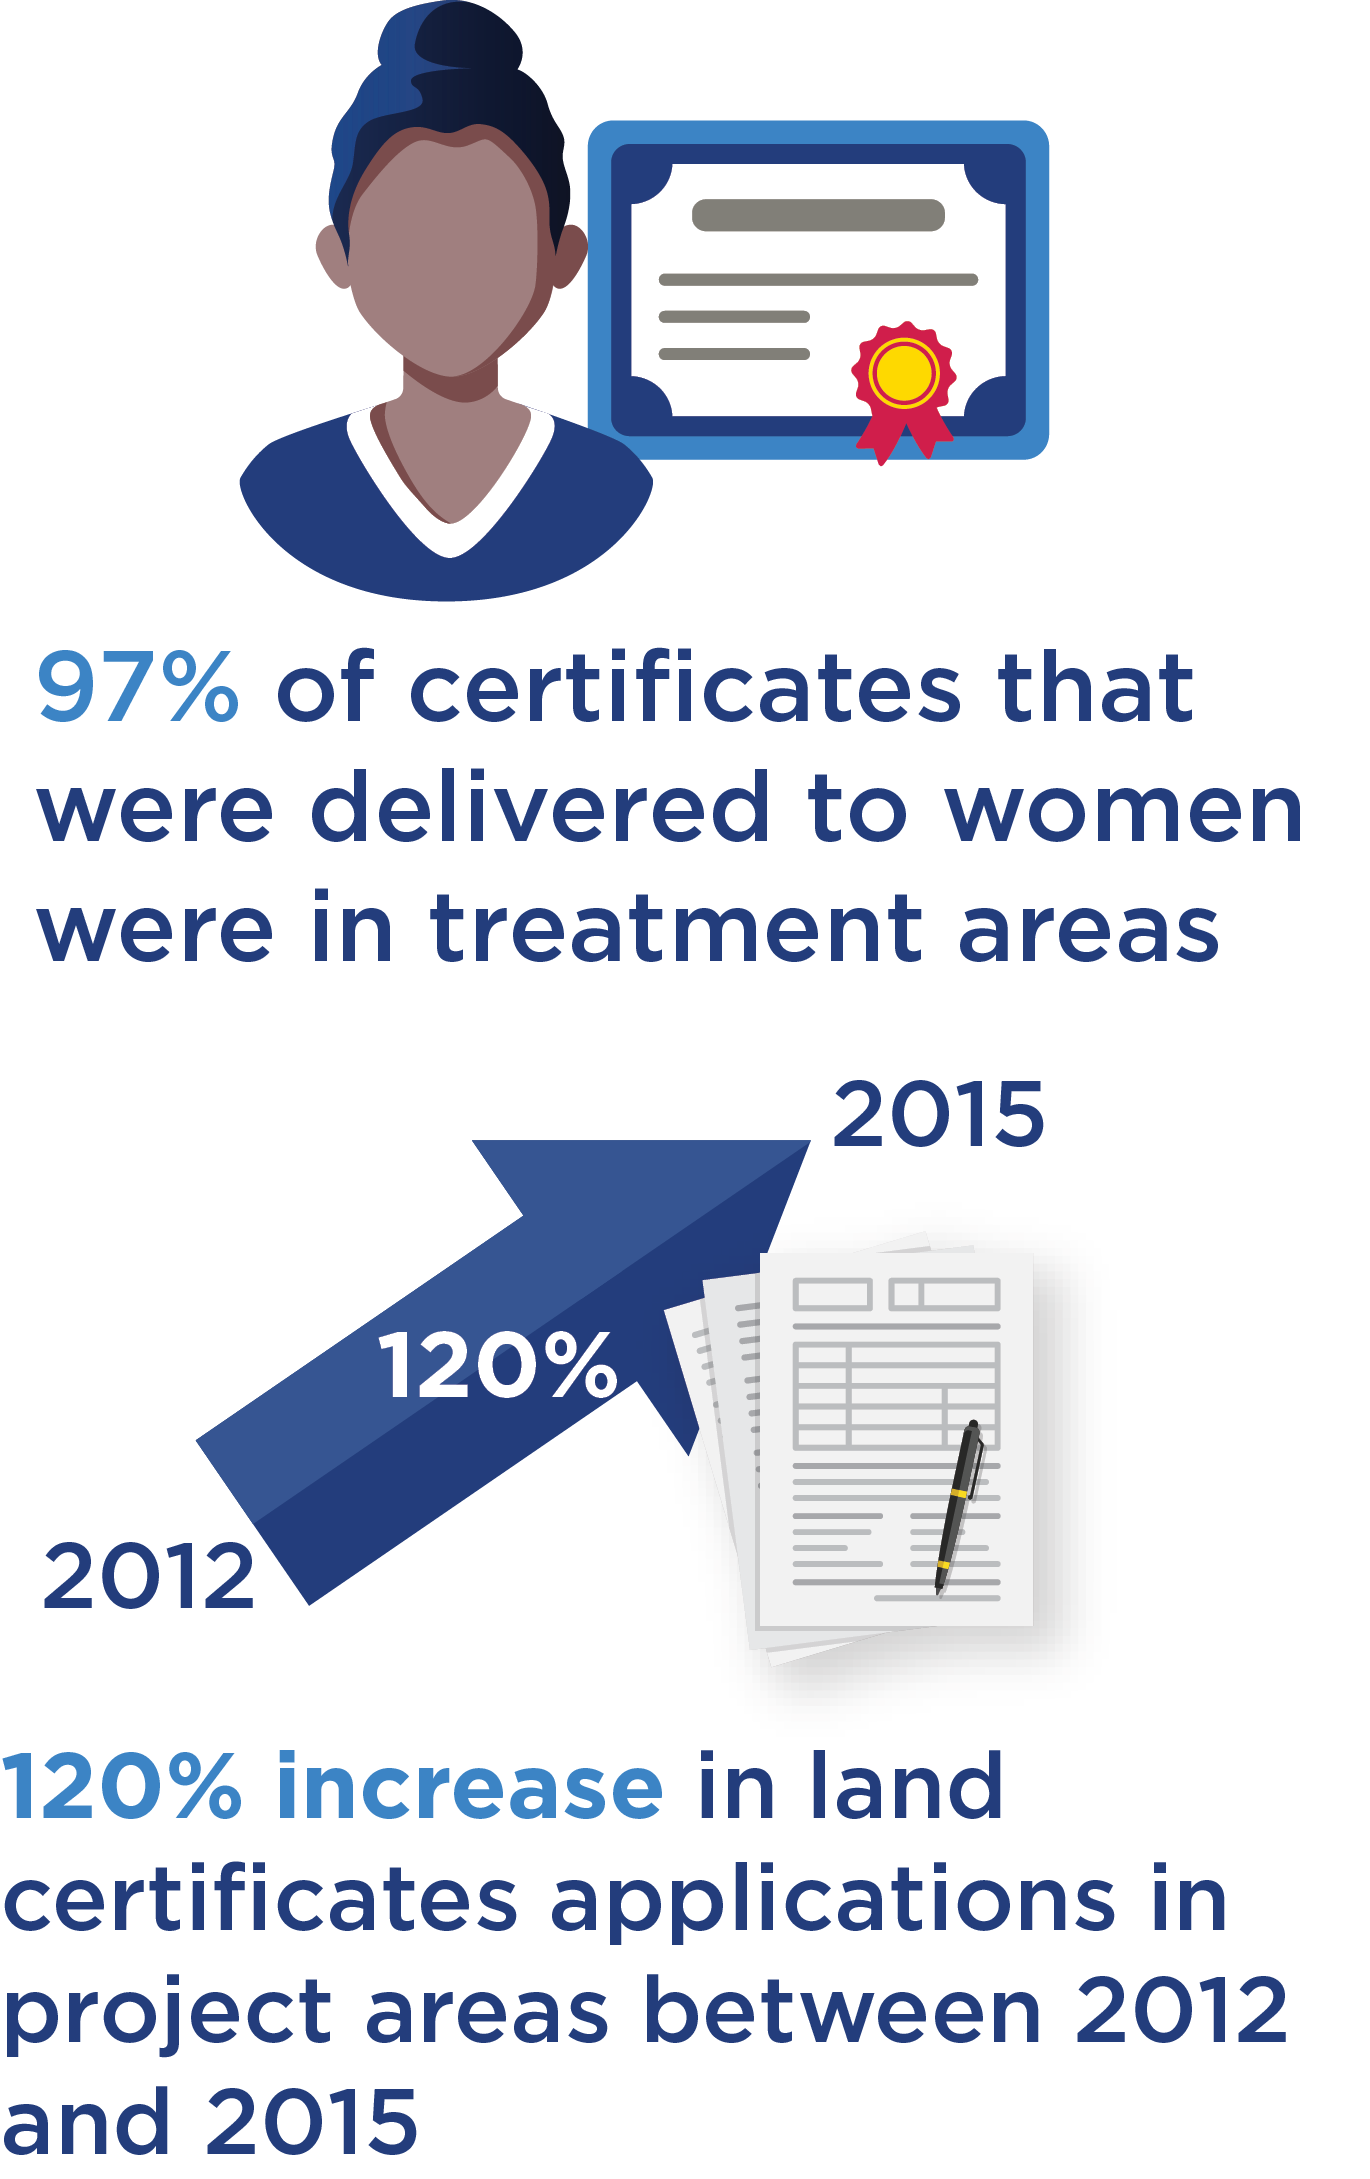 97% of certificcates that were delivered to women were in treatment areas. There was a 120% increase in land title applications in project areas between 2012 and 2015.